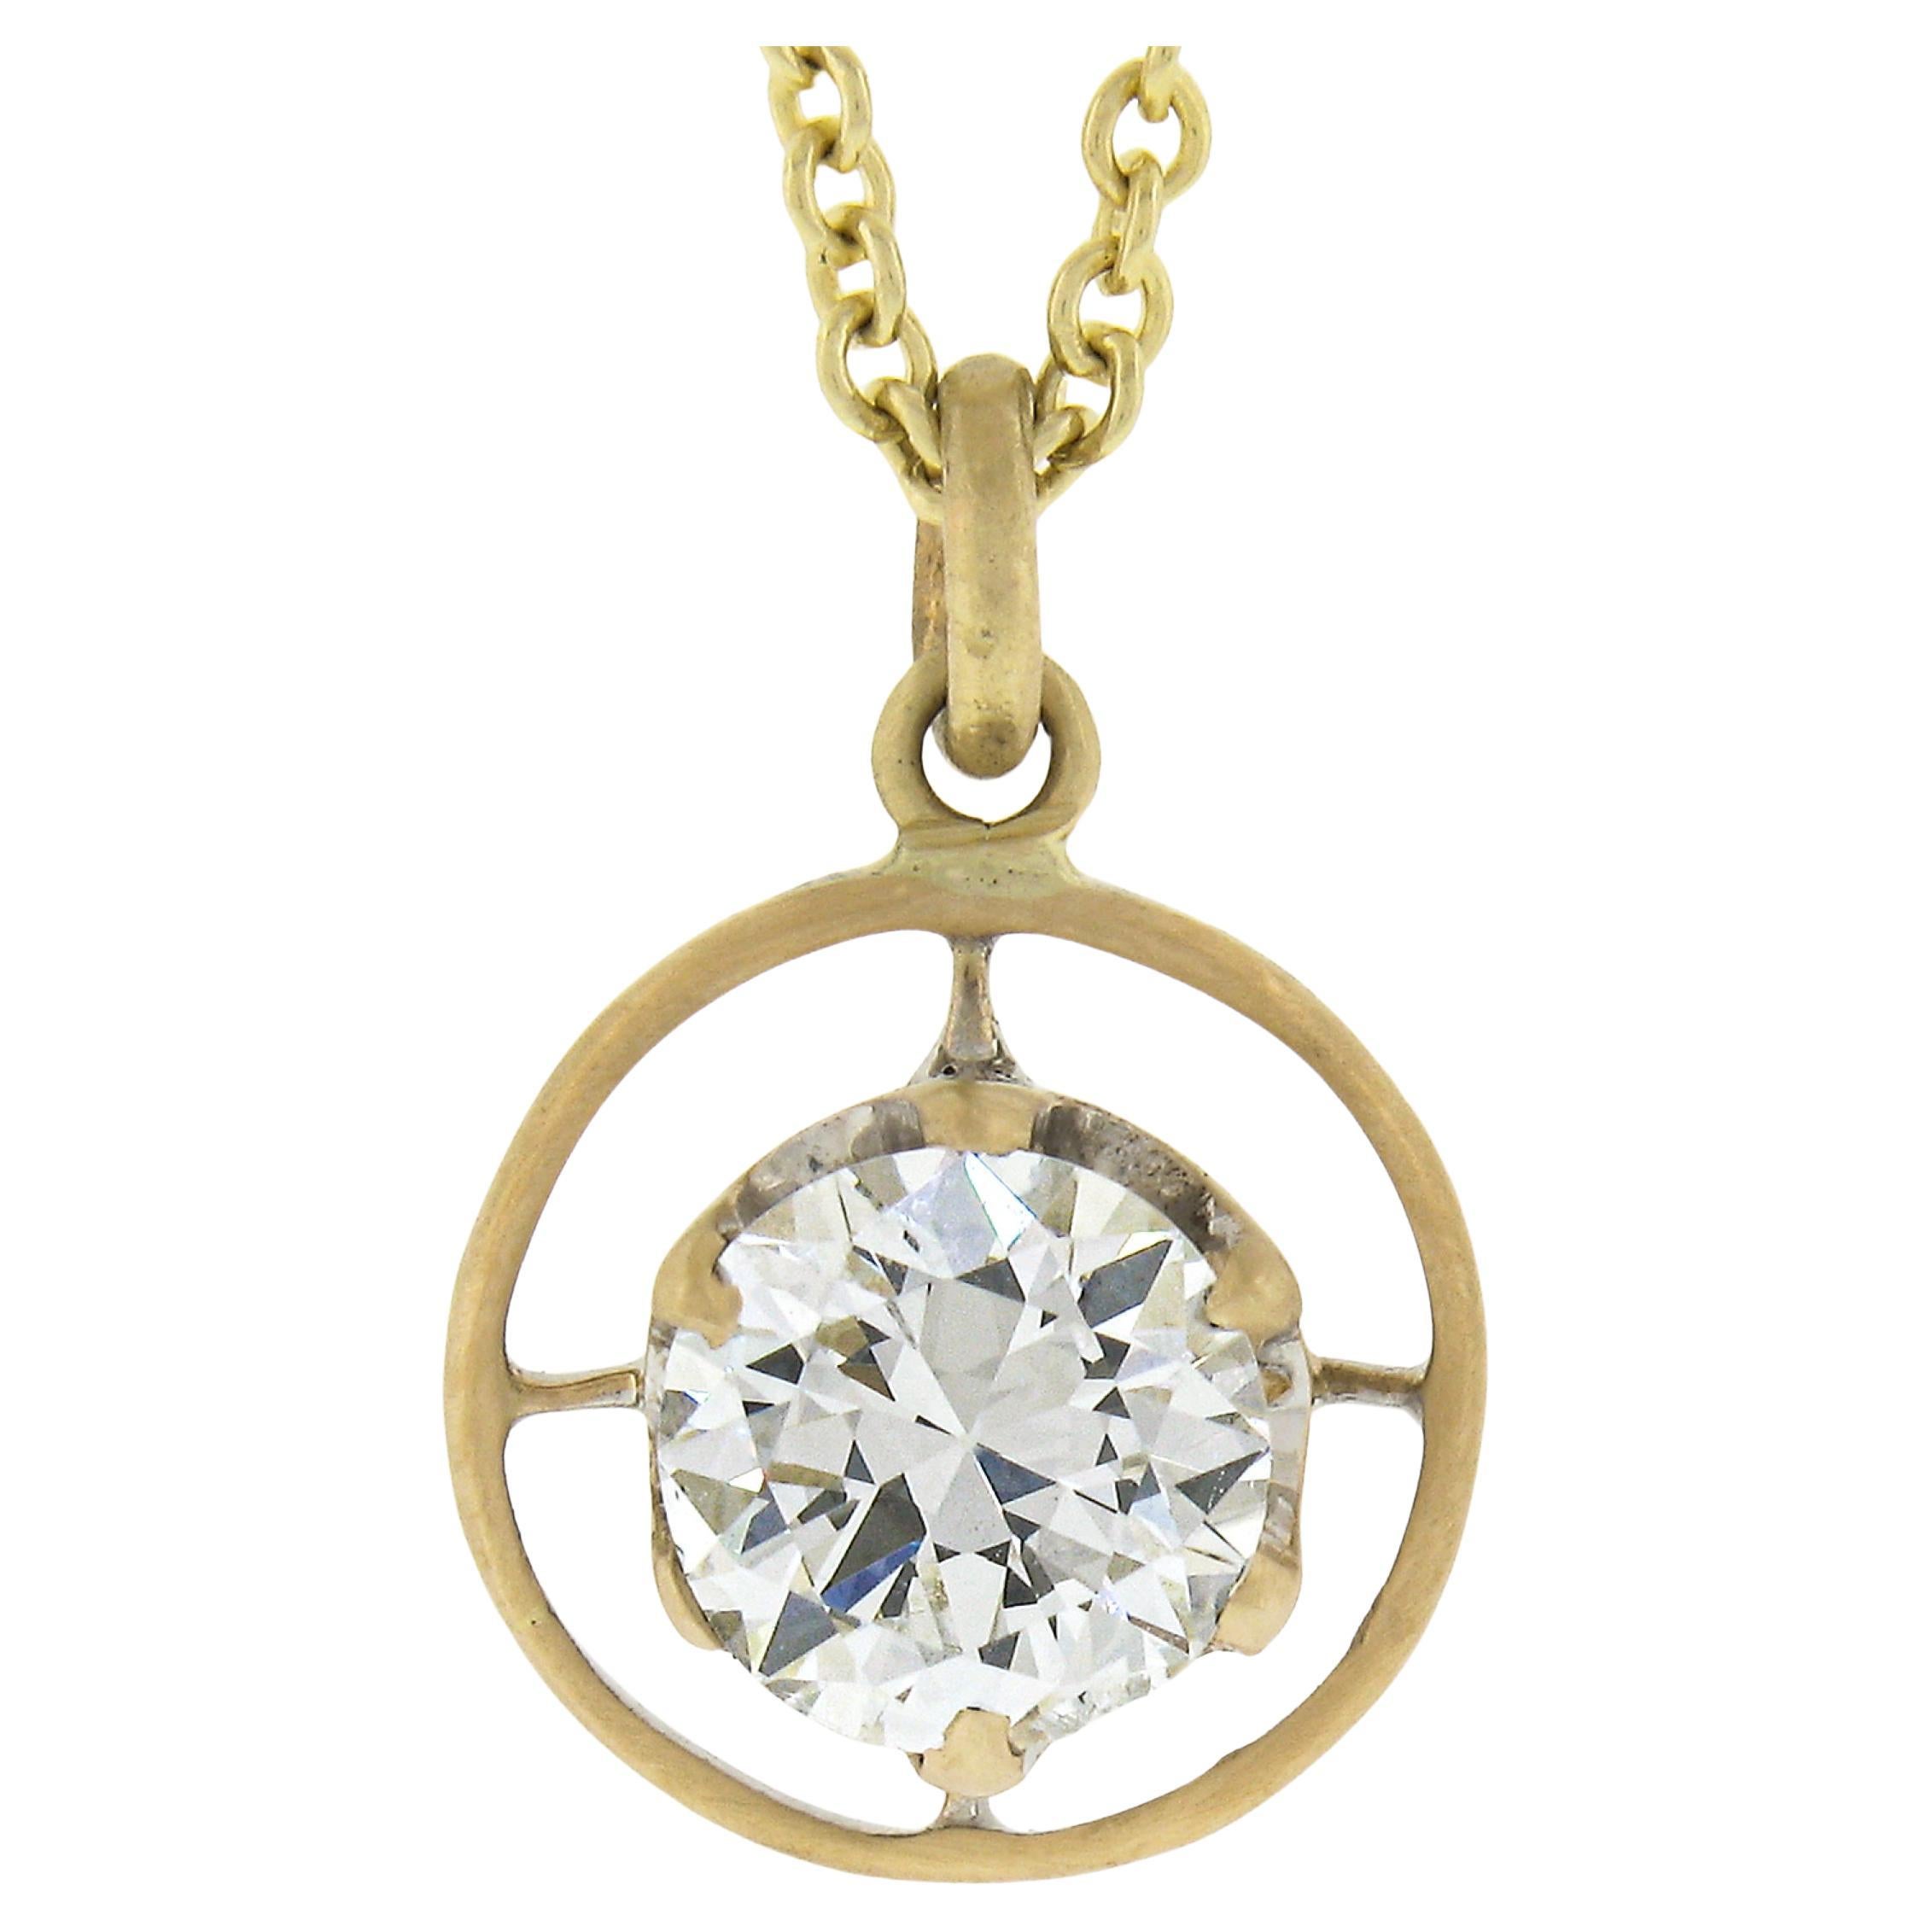 Antique 14k Gold .69ct GIA Round Prong Diamond Solitaire Target Pendant & Chain